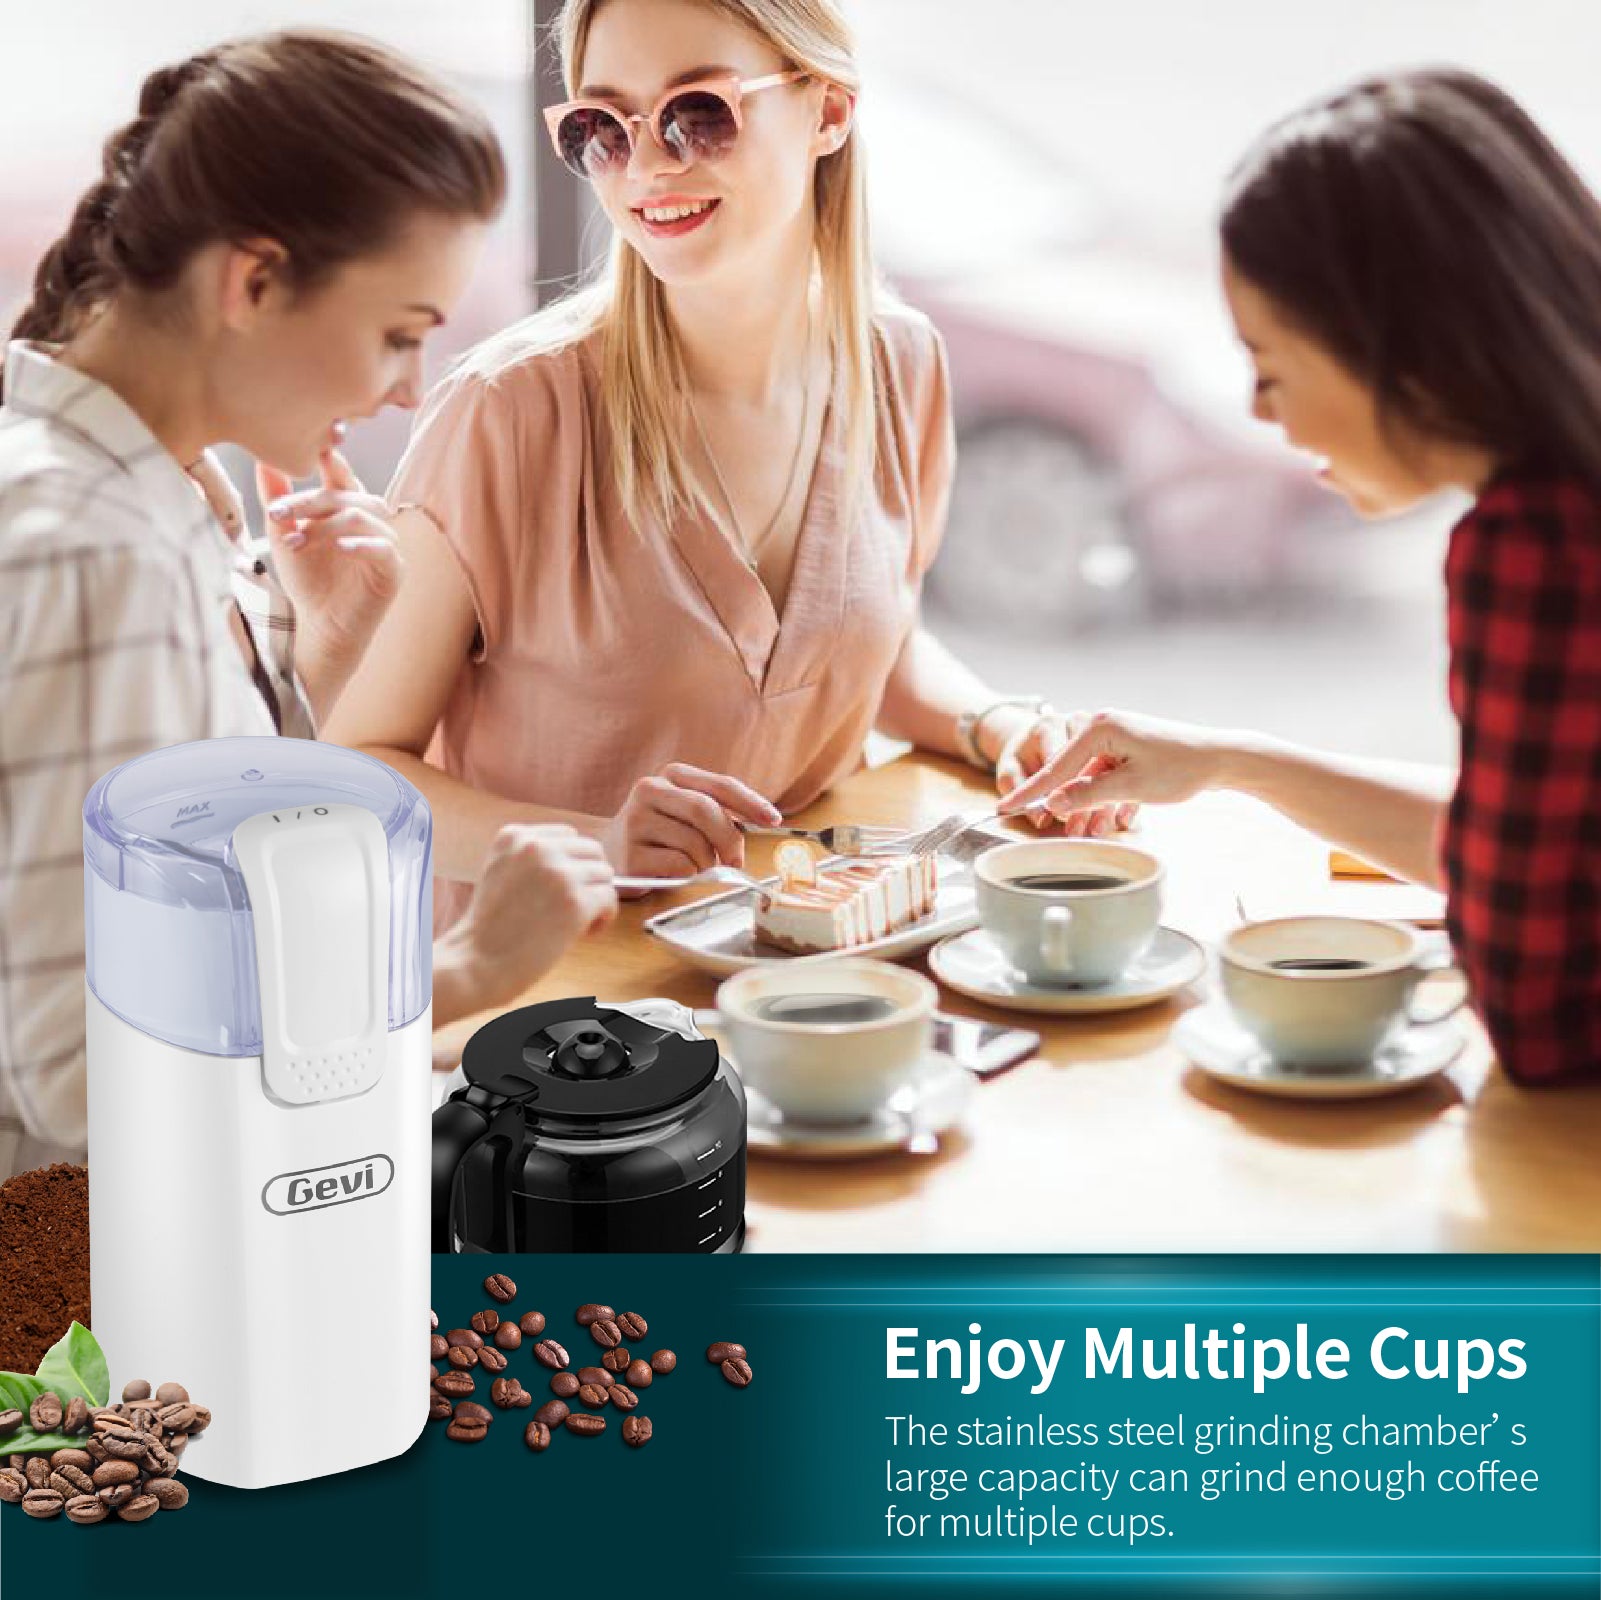 Gevi 12 Cup Coffee Grinder with Removable Stainless Steel Bowl